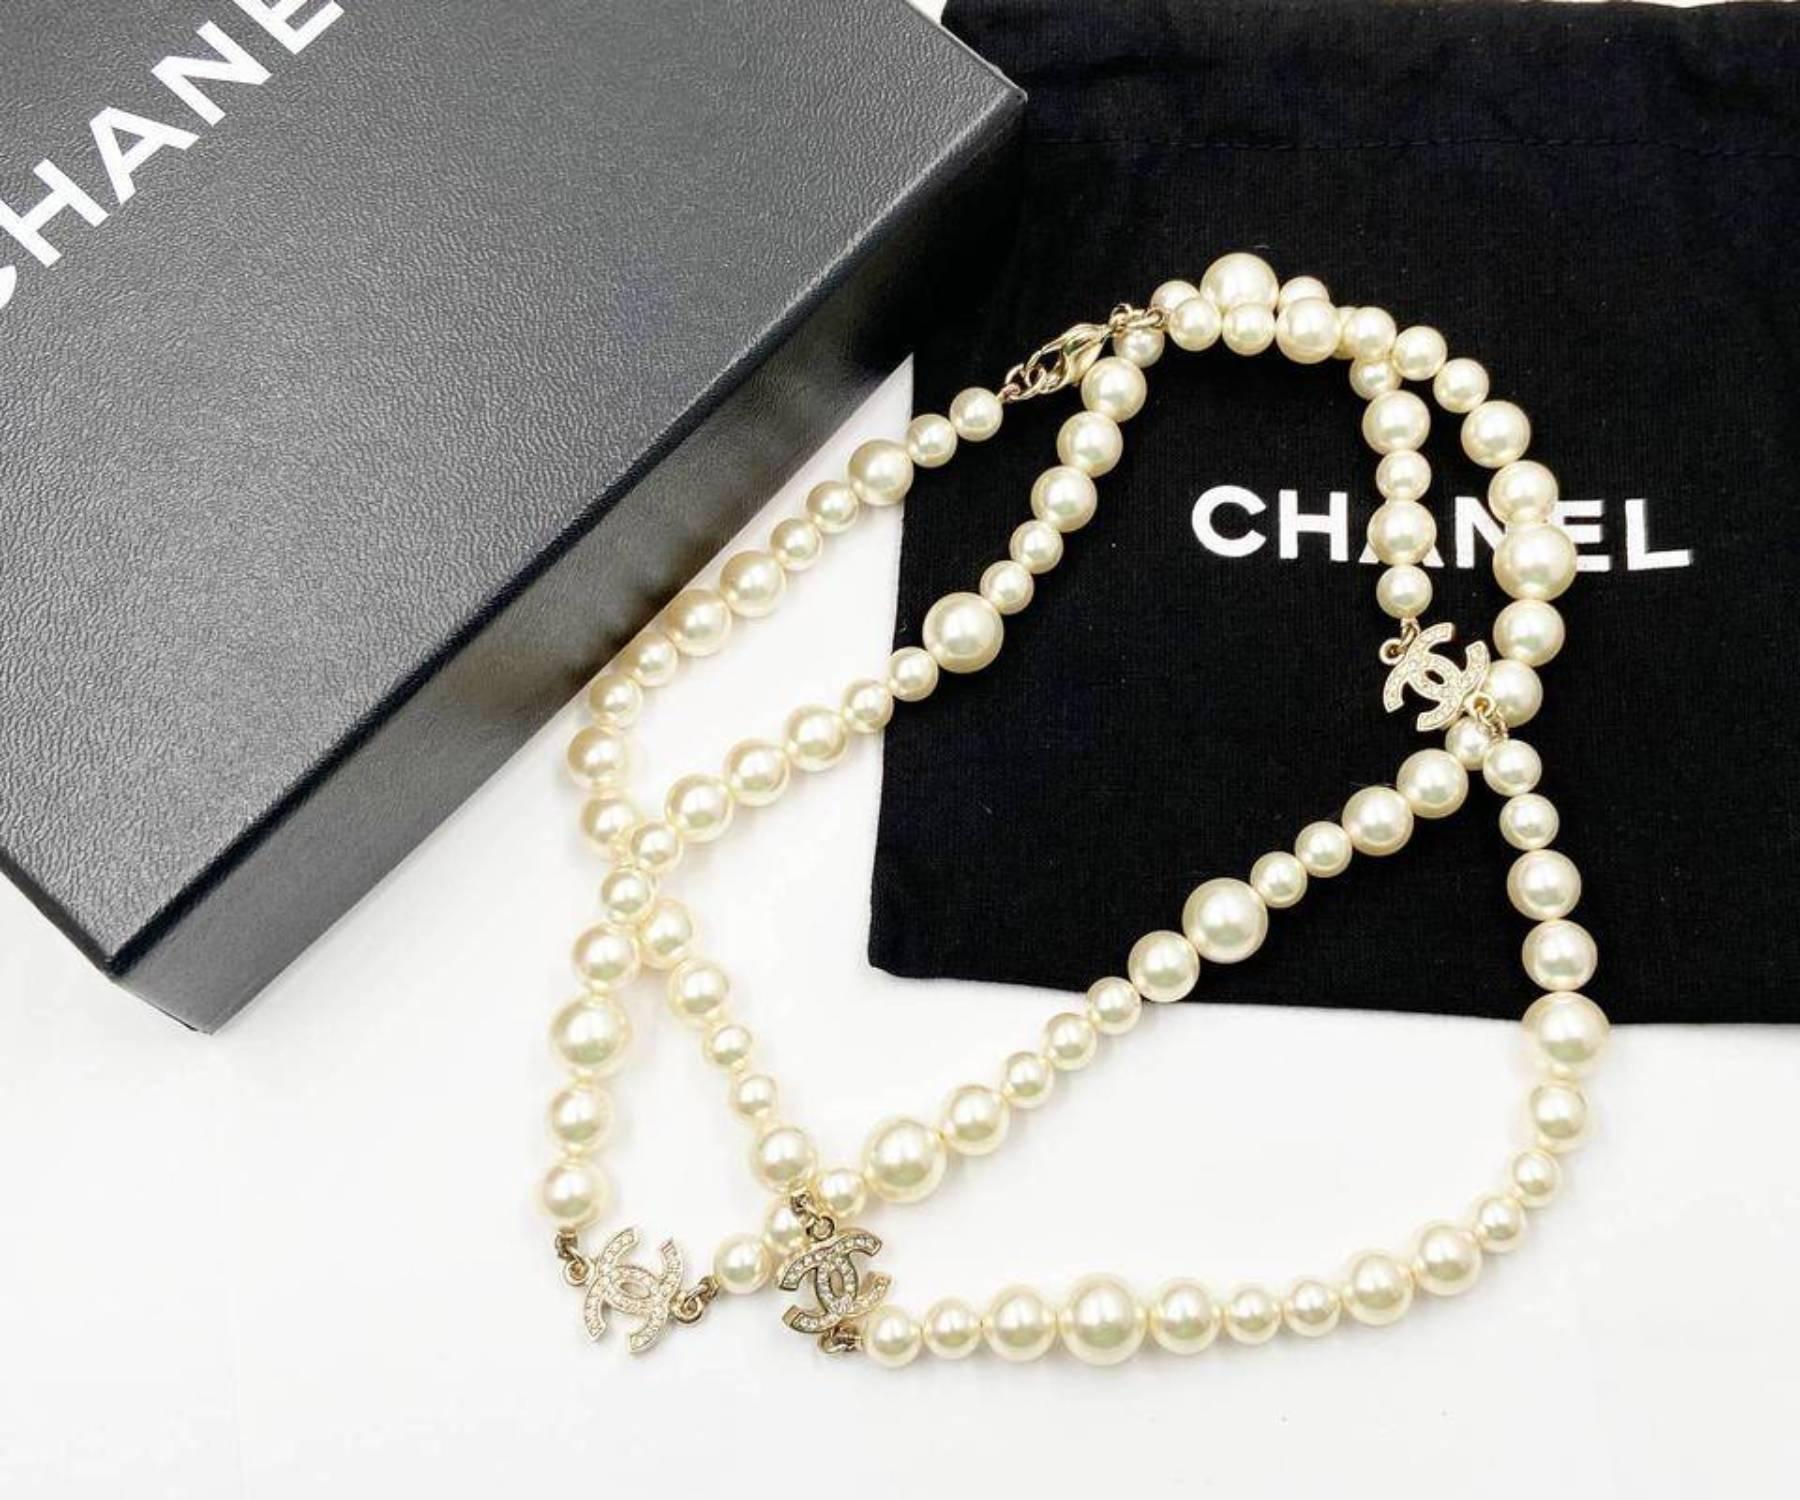 Chanel Classic 3 Gold CC Crystal Long Pearl Necklace

*Marked 13
*Made in France
*Comes with original box and dustbag

-Approximately 36